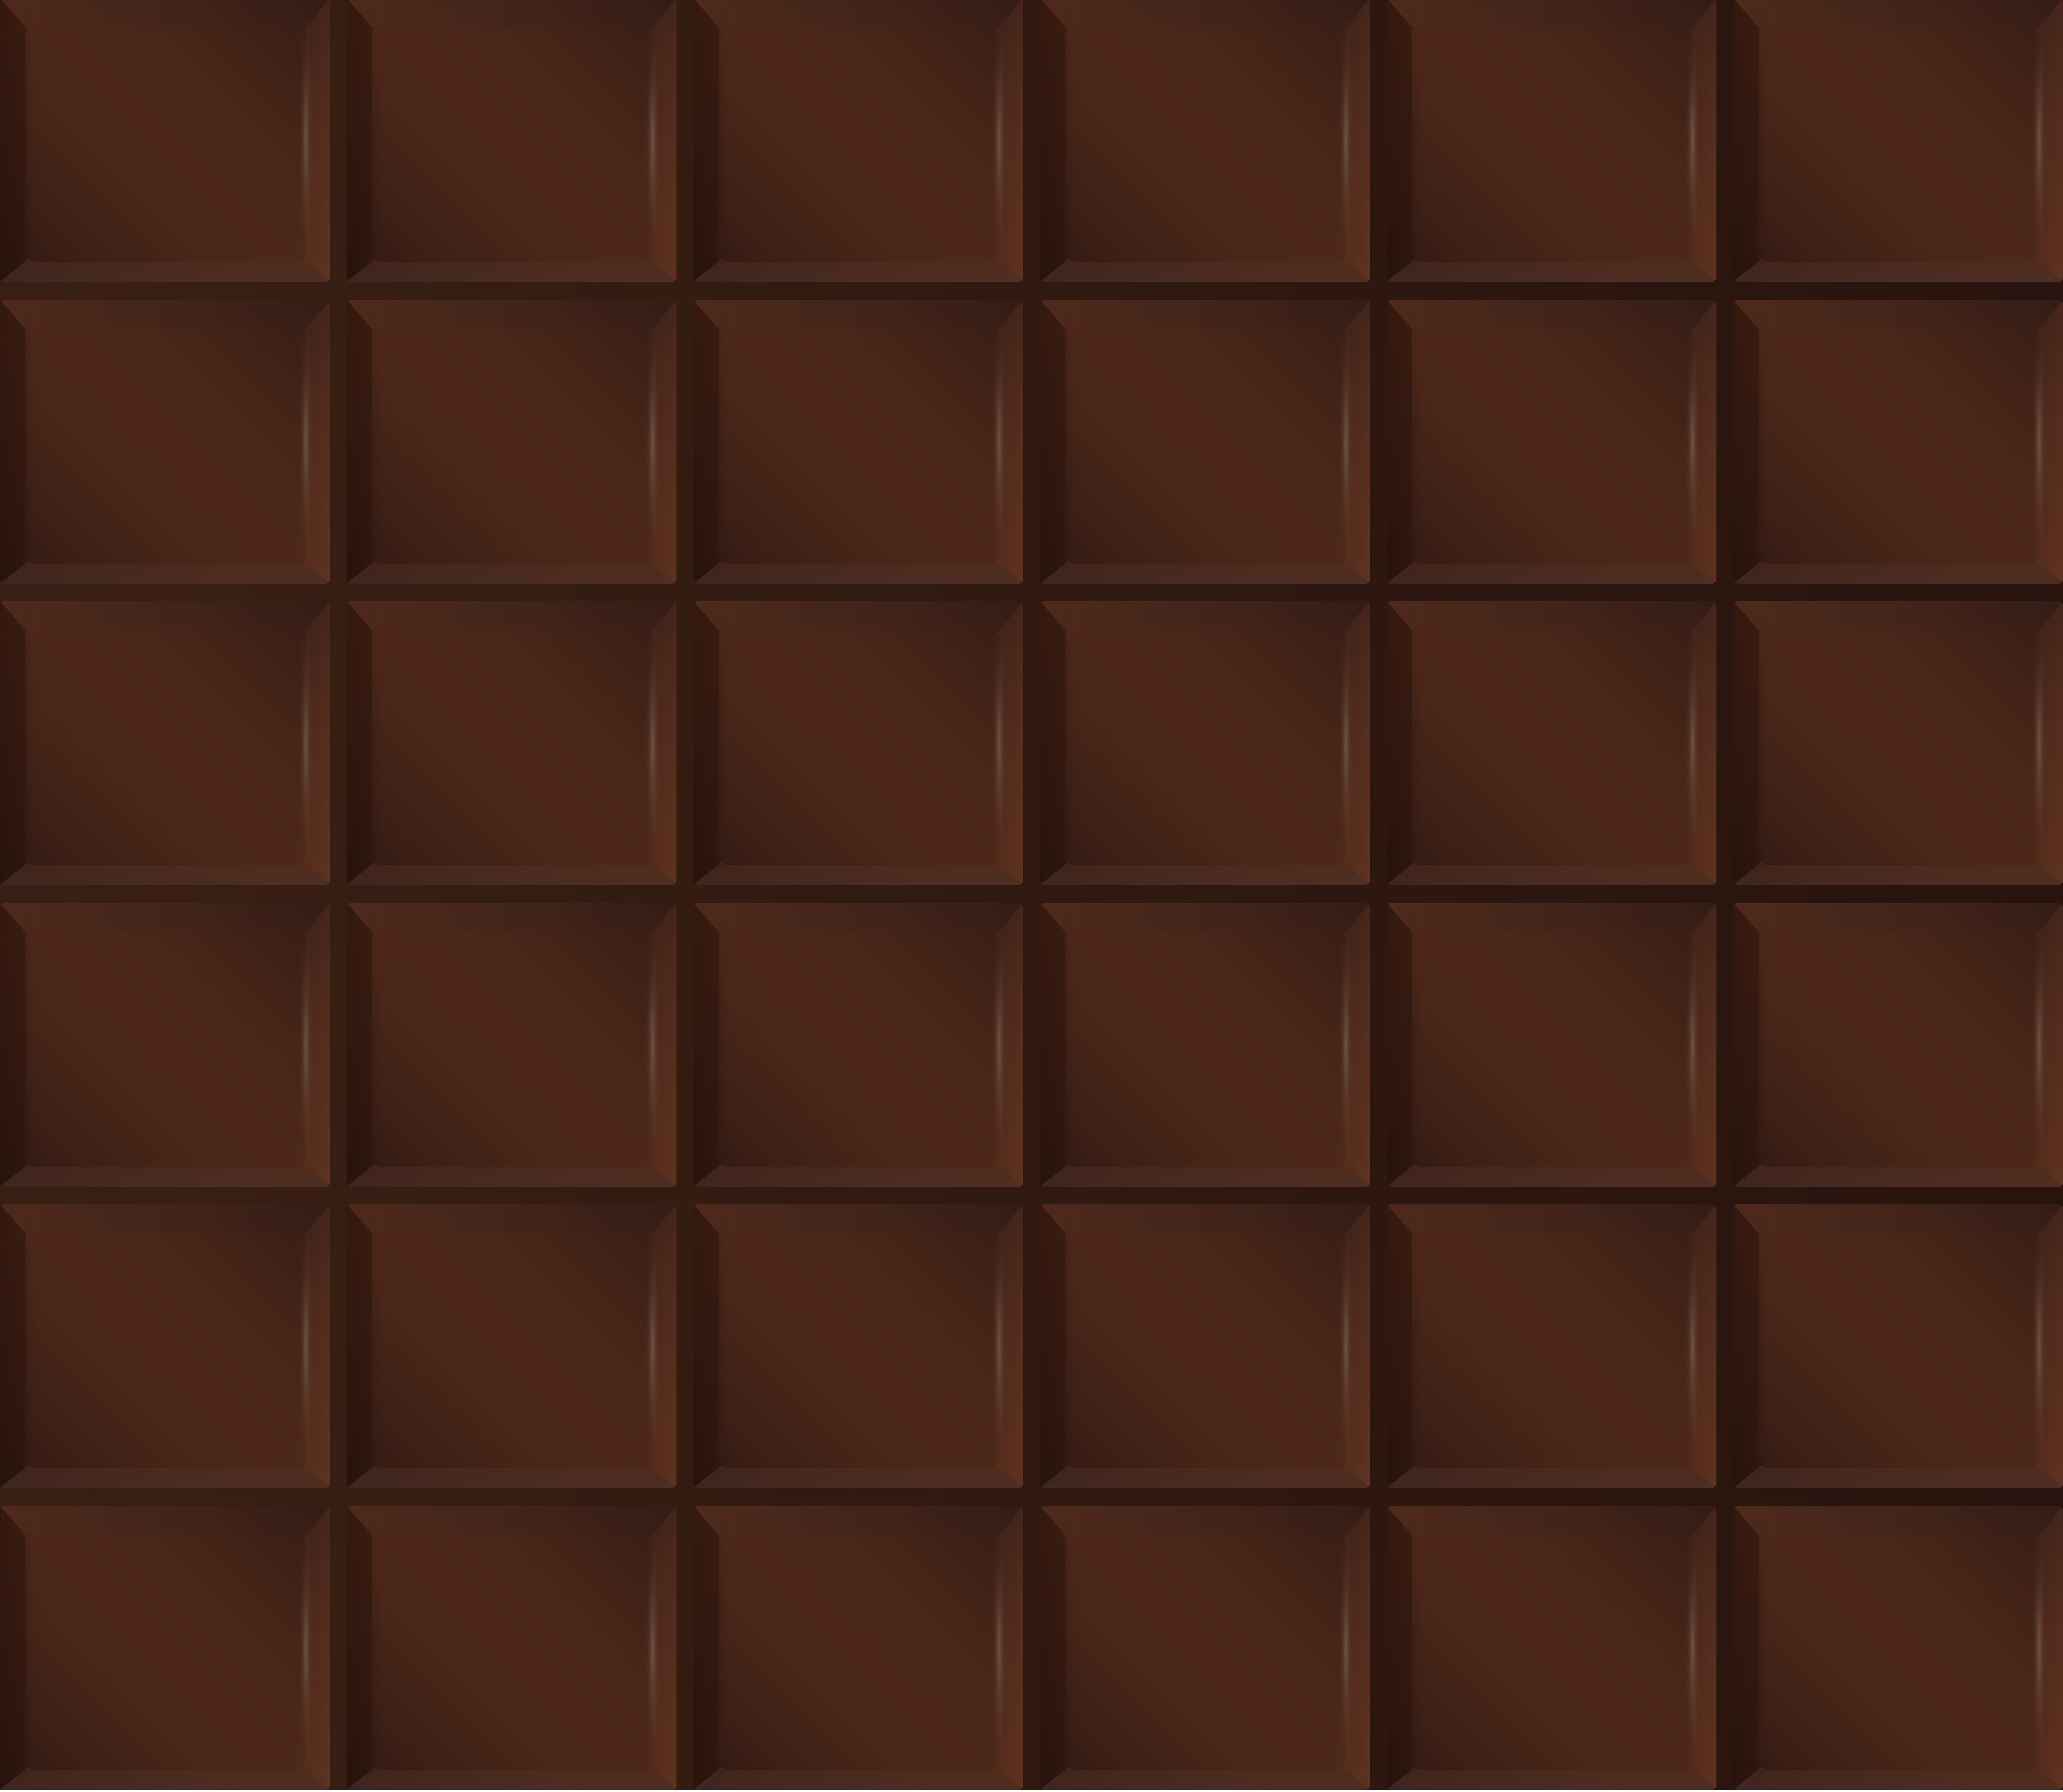 Chocolate Bar Background​-Quality Image and Transparent PNG Free Clipart